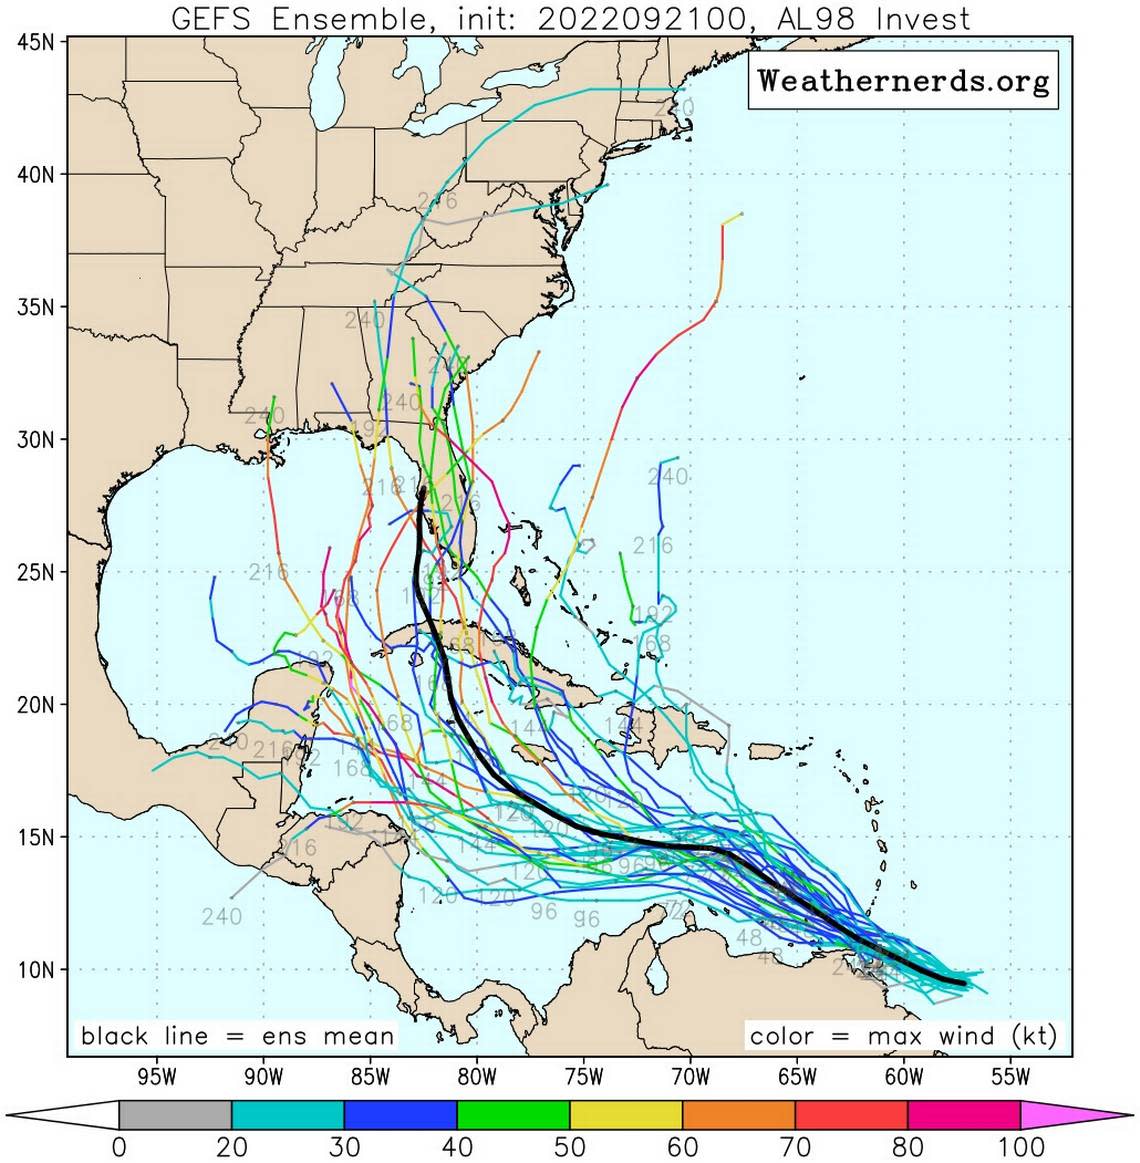 This image shows the morning GEFS ensemble, which includes multiple runs of the American GFS computer model, for invest 98 on September 21, 2022. The black line in the center is the ensemble mean, the center of all the predictions.